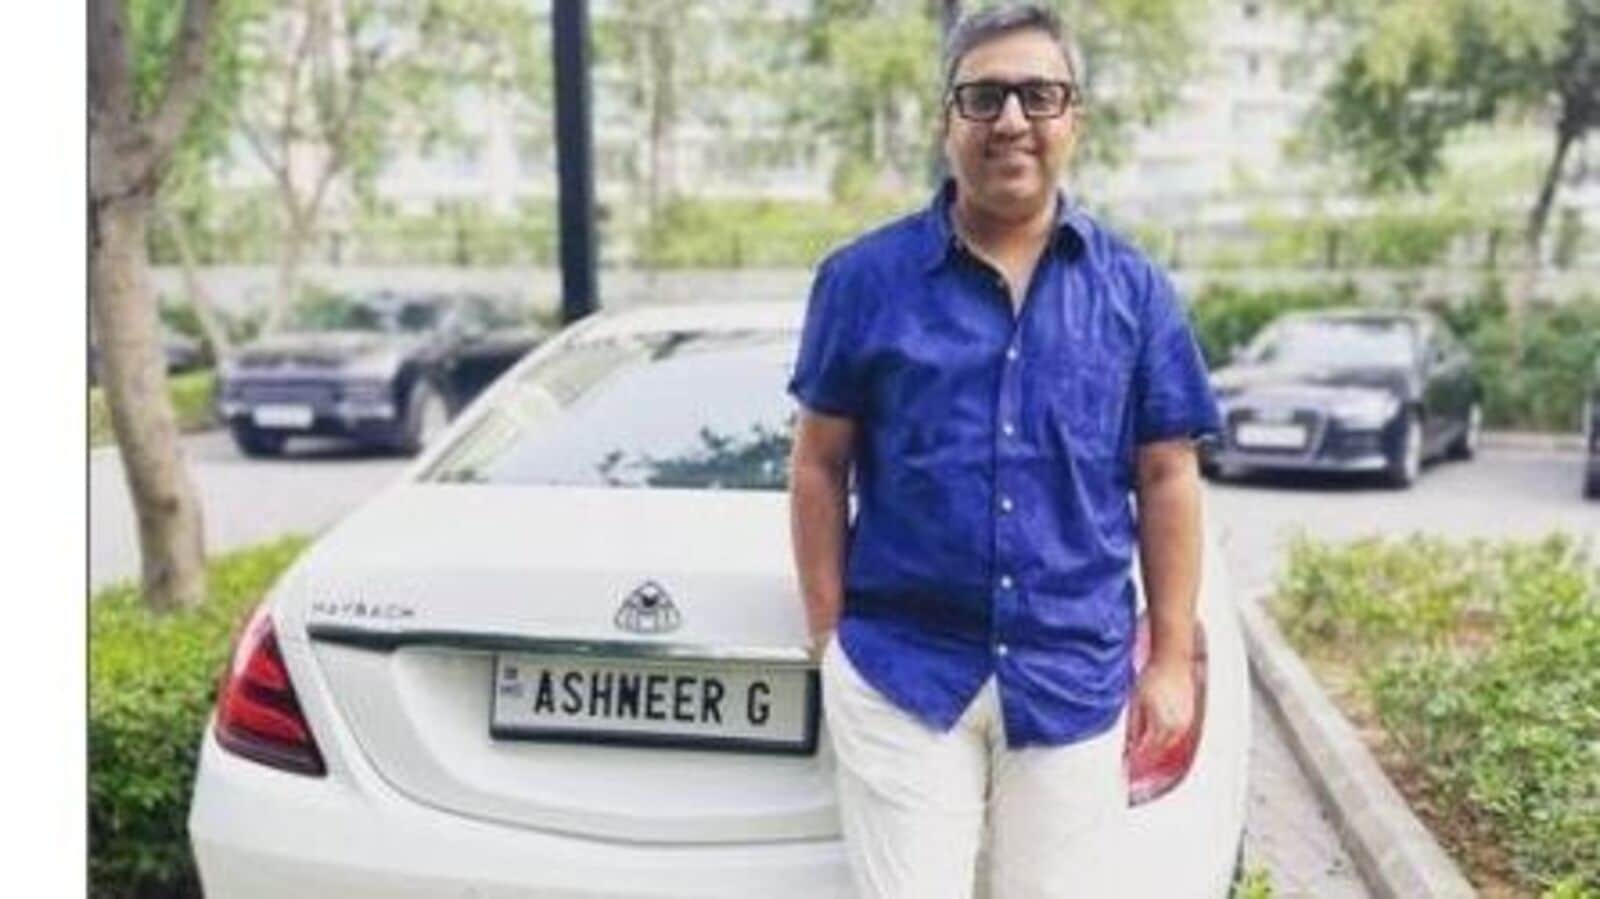 Here's what Ashneer Grover's Mercedes Maybach number plate reads